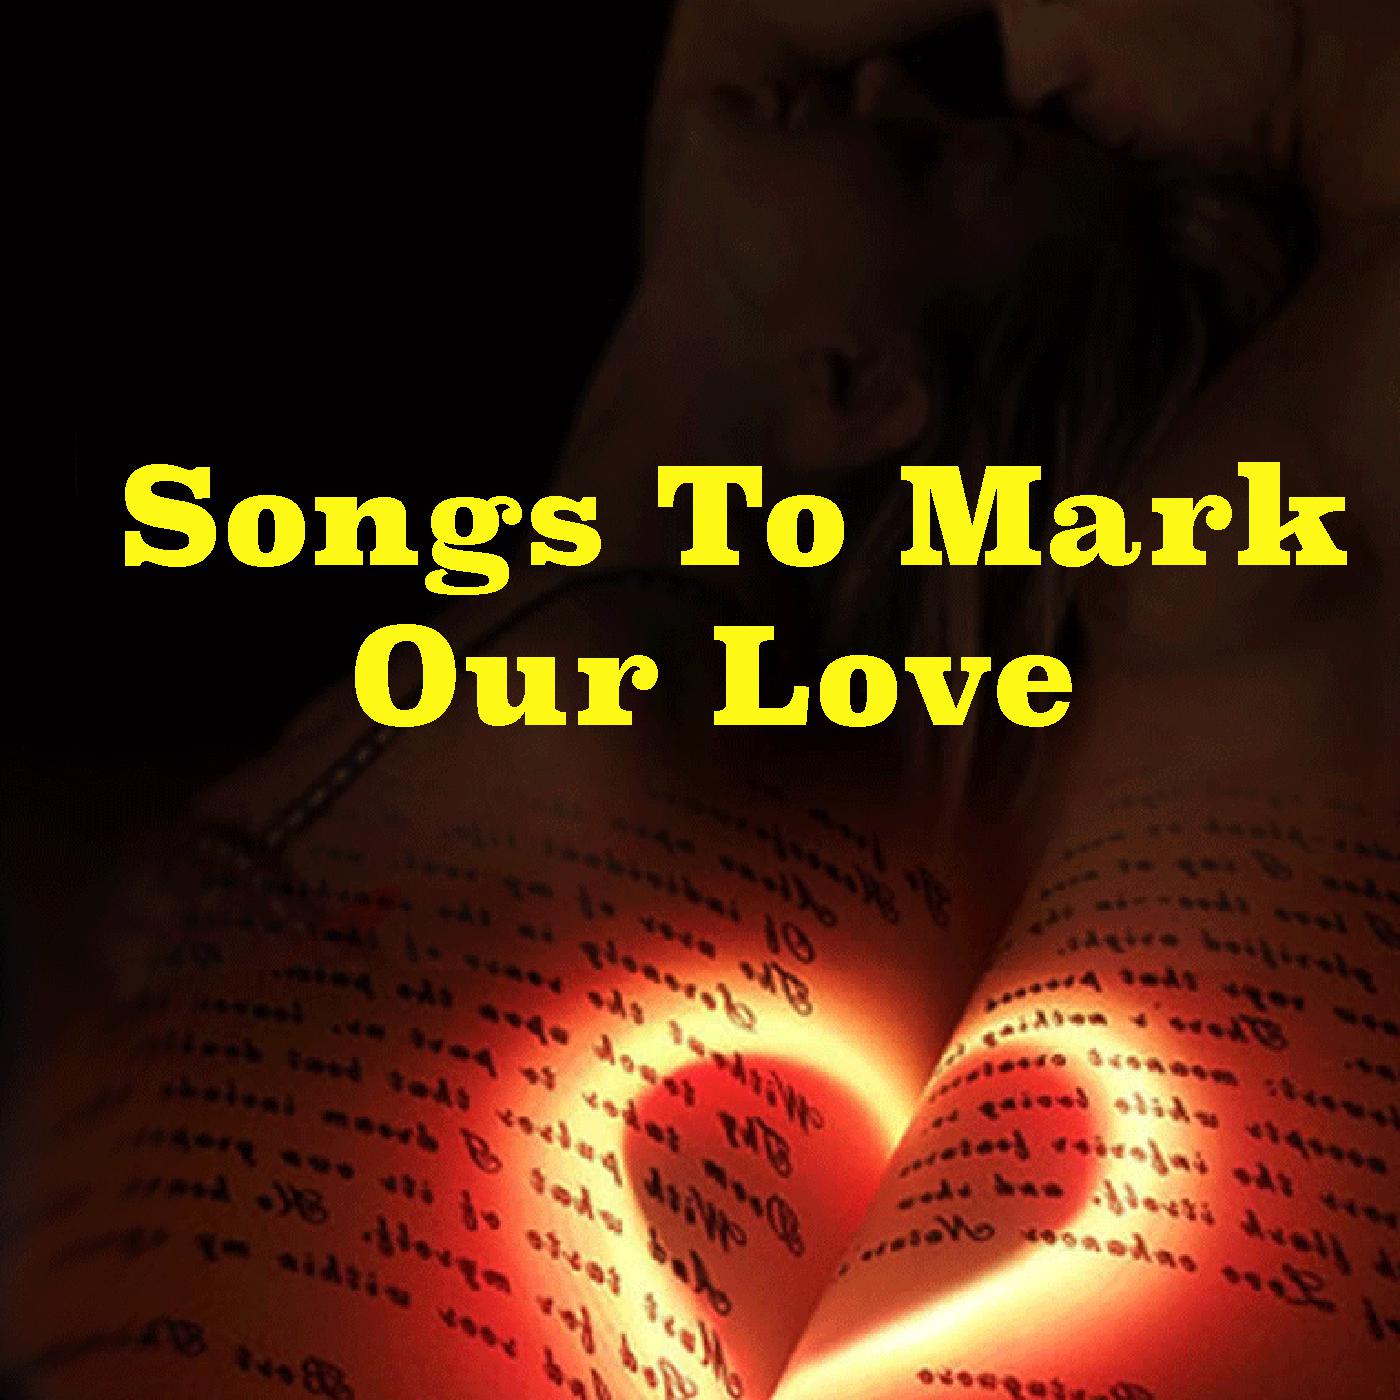 Songs To Mark Our Love